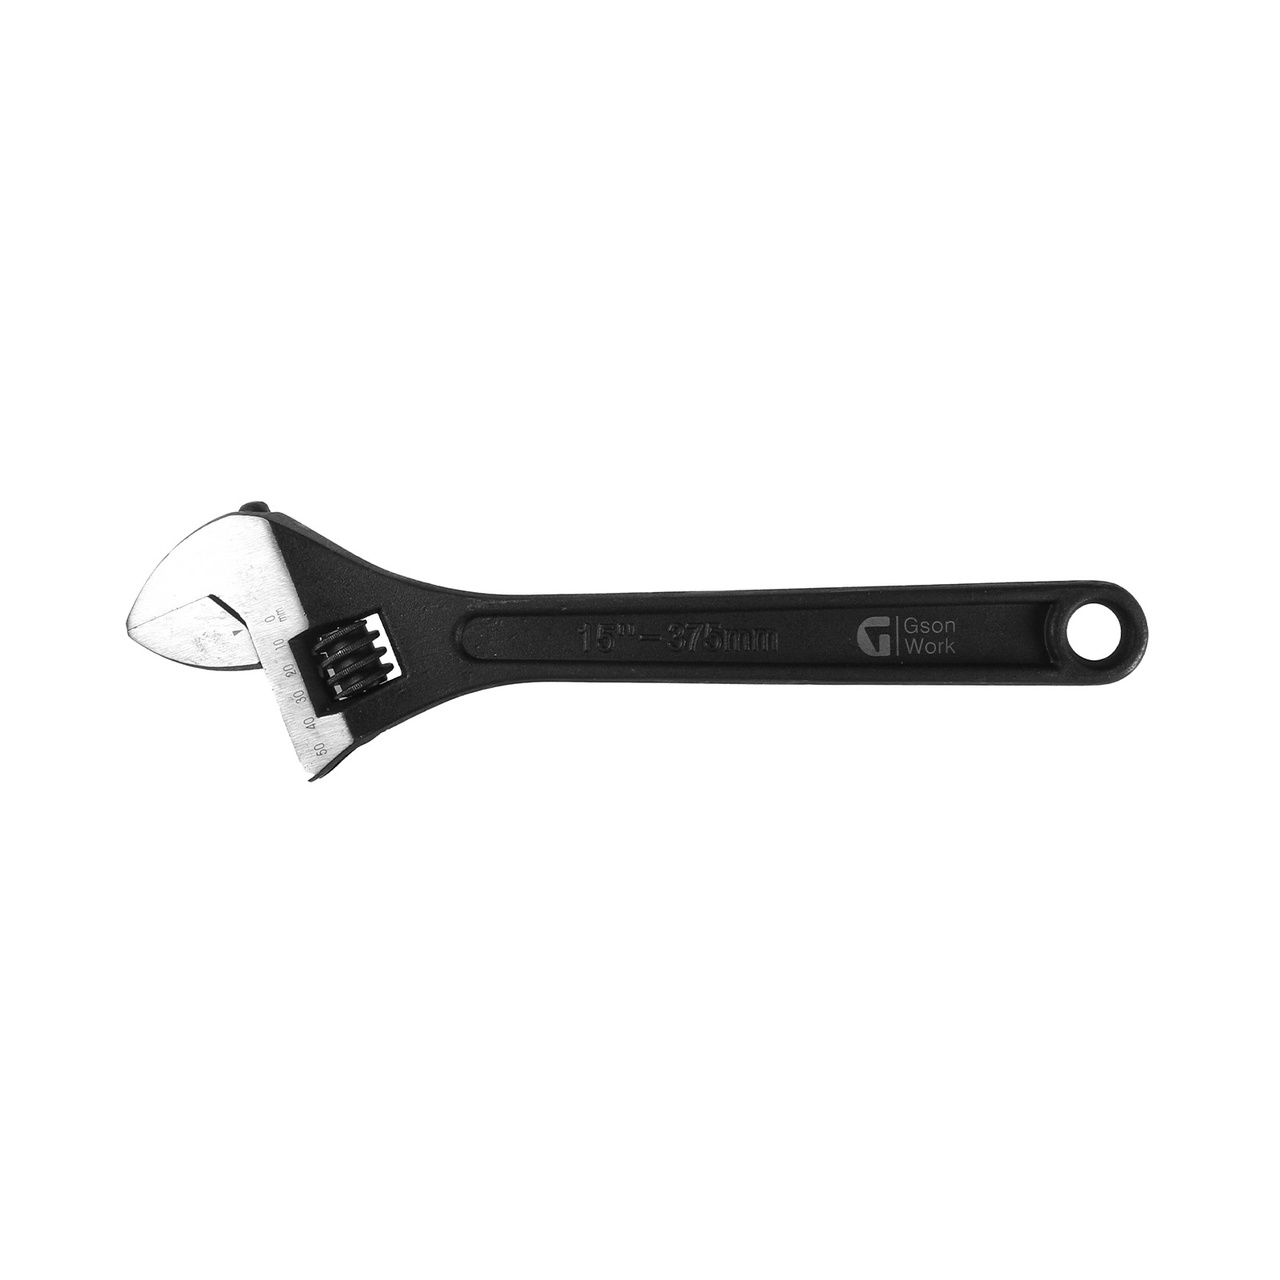 Adjustable Wrench 8" / 200 mm